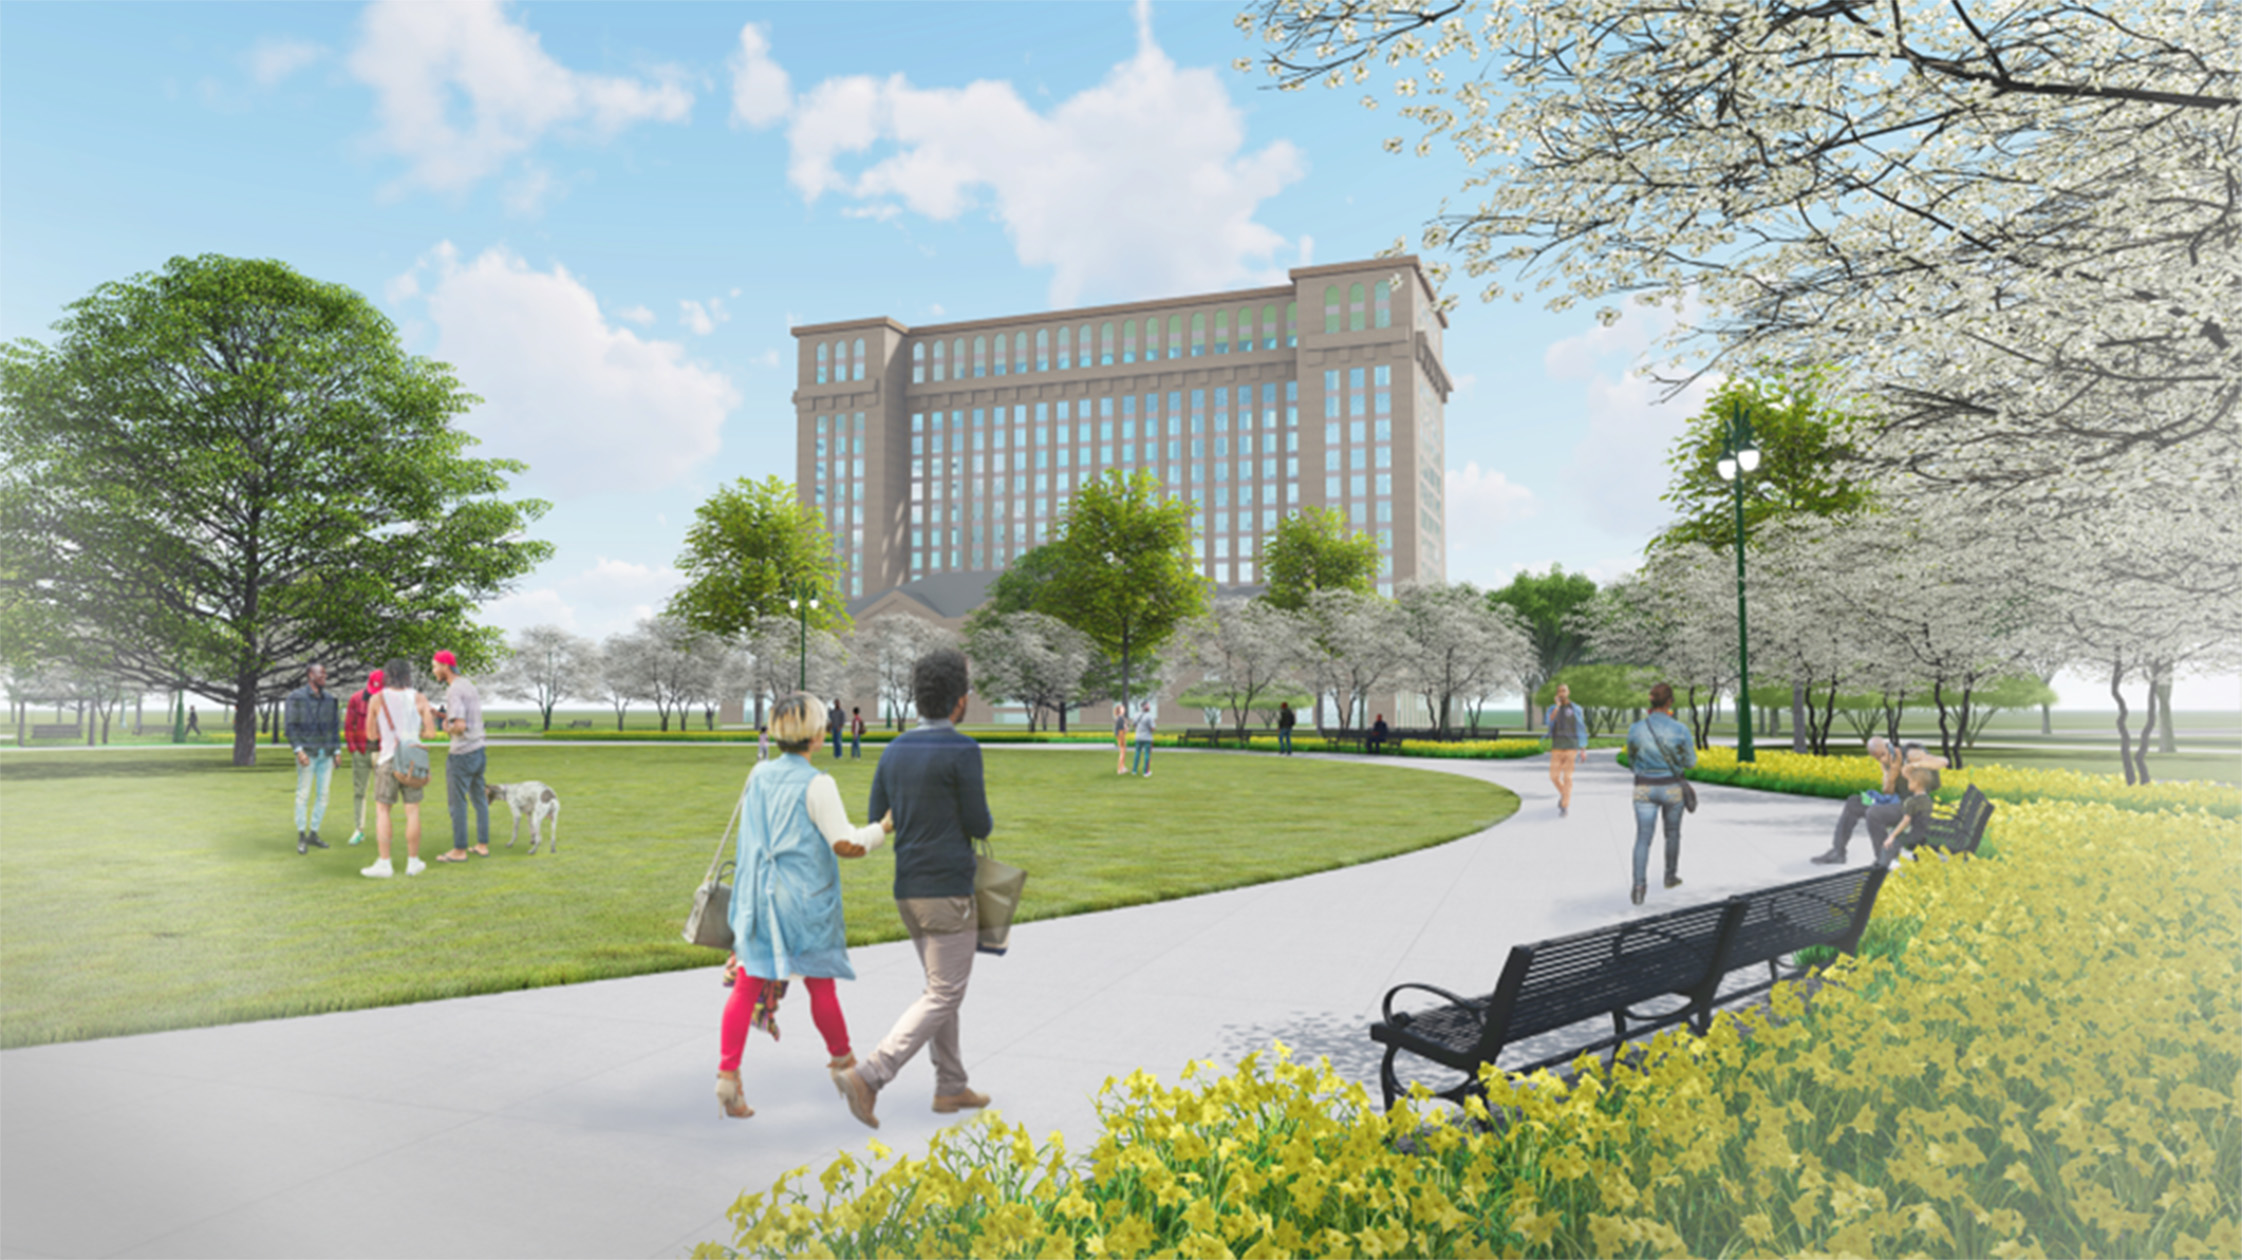 Rendering of the central lawn at Roosevelt Park on a spring day